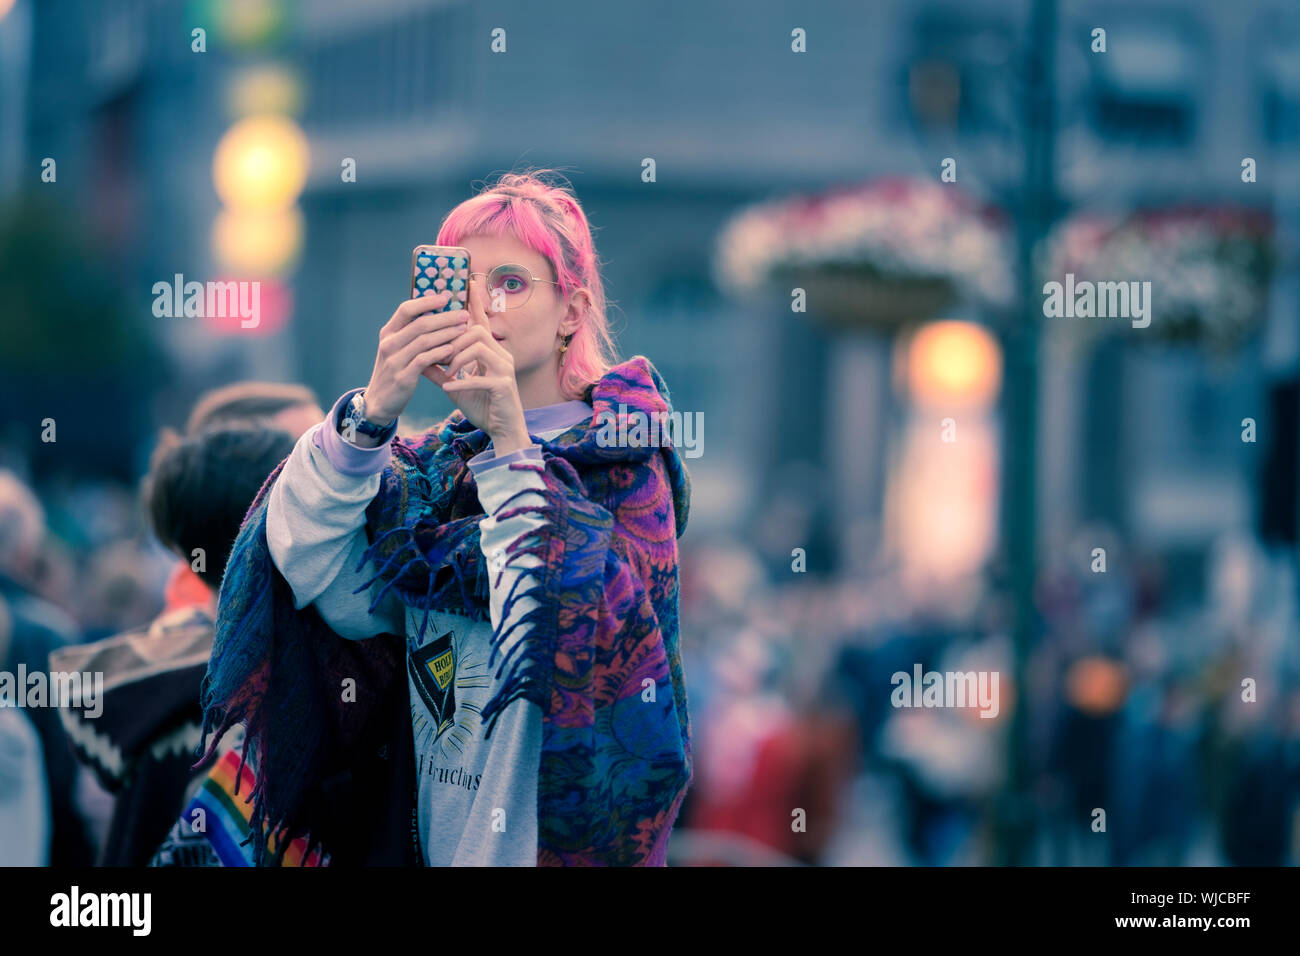 Girl taking a picture with a smart phone, Menningarnott or Cultural day, Reykjavik, Iceland. Stock Photo